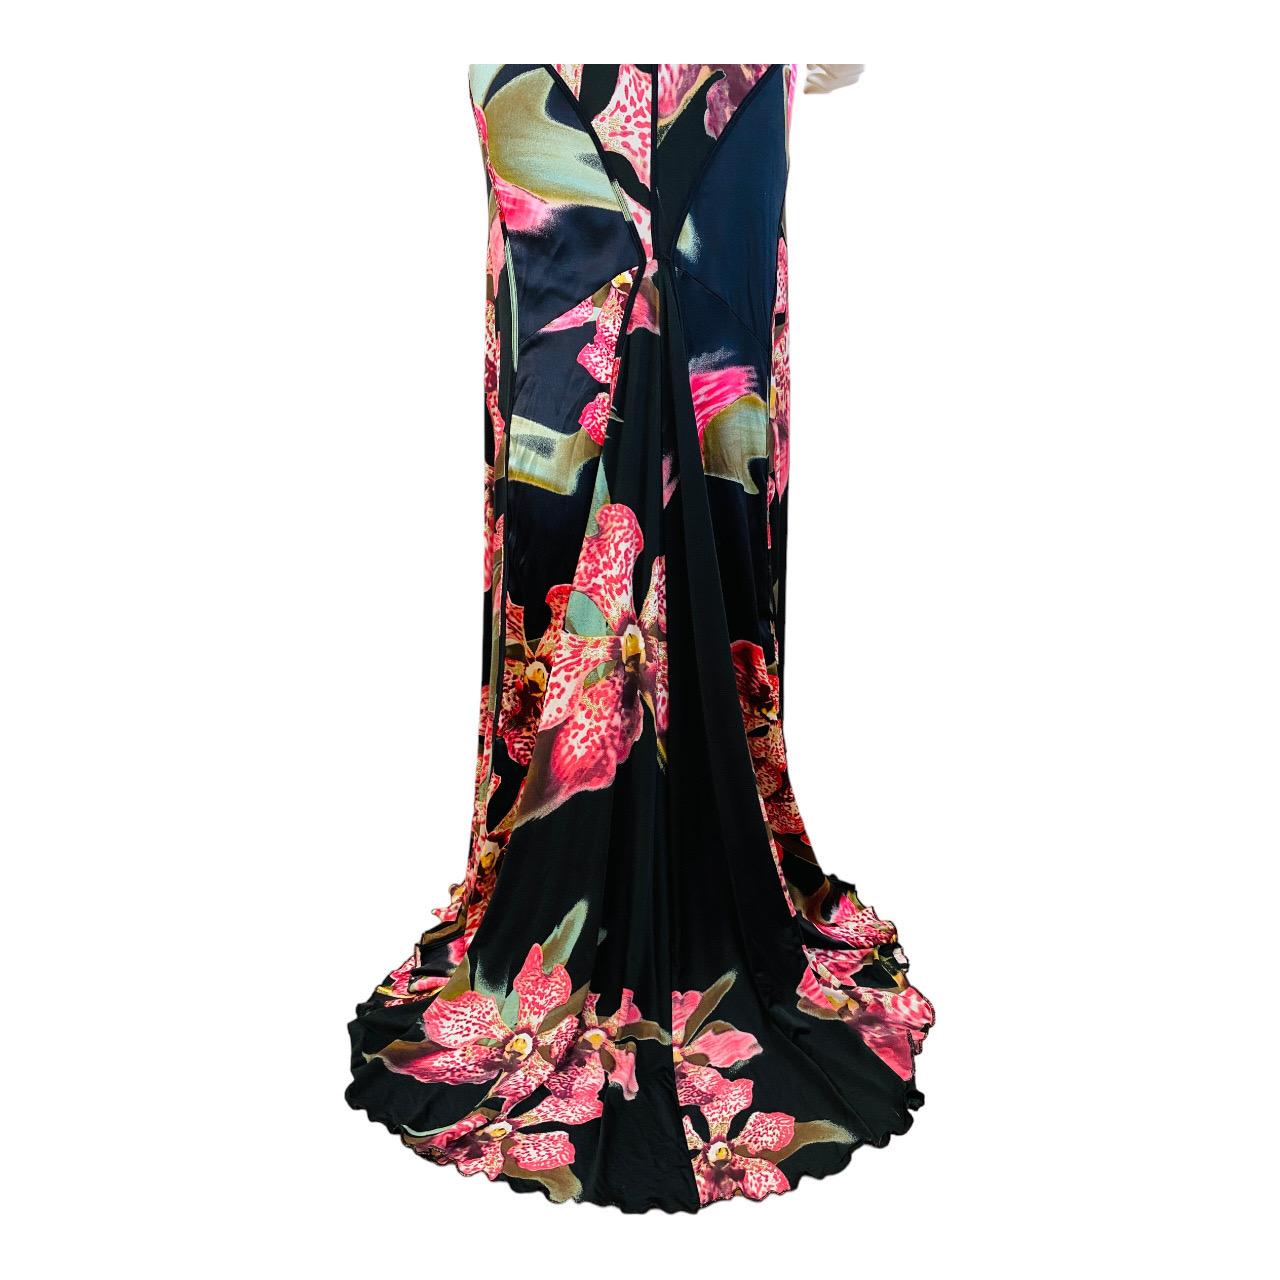 Vintage Roberto Cavalli F/W 2004 Floral Orchid Print Pink + Black Dress Gown For Sale 7